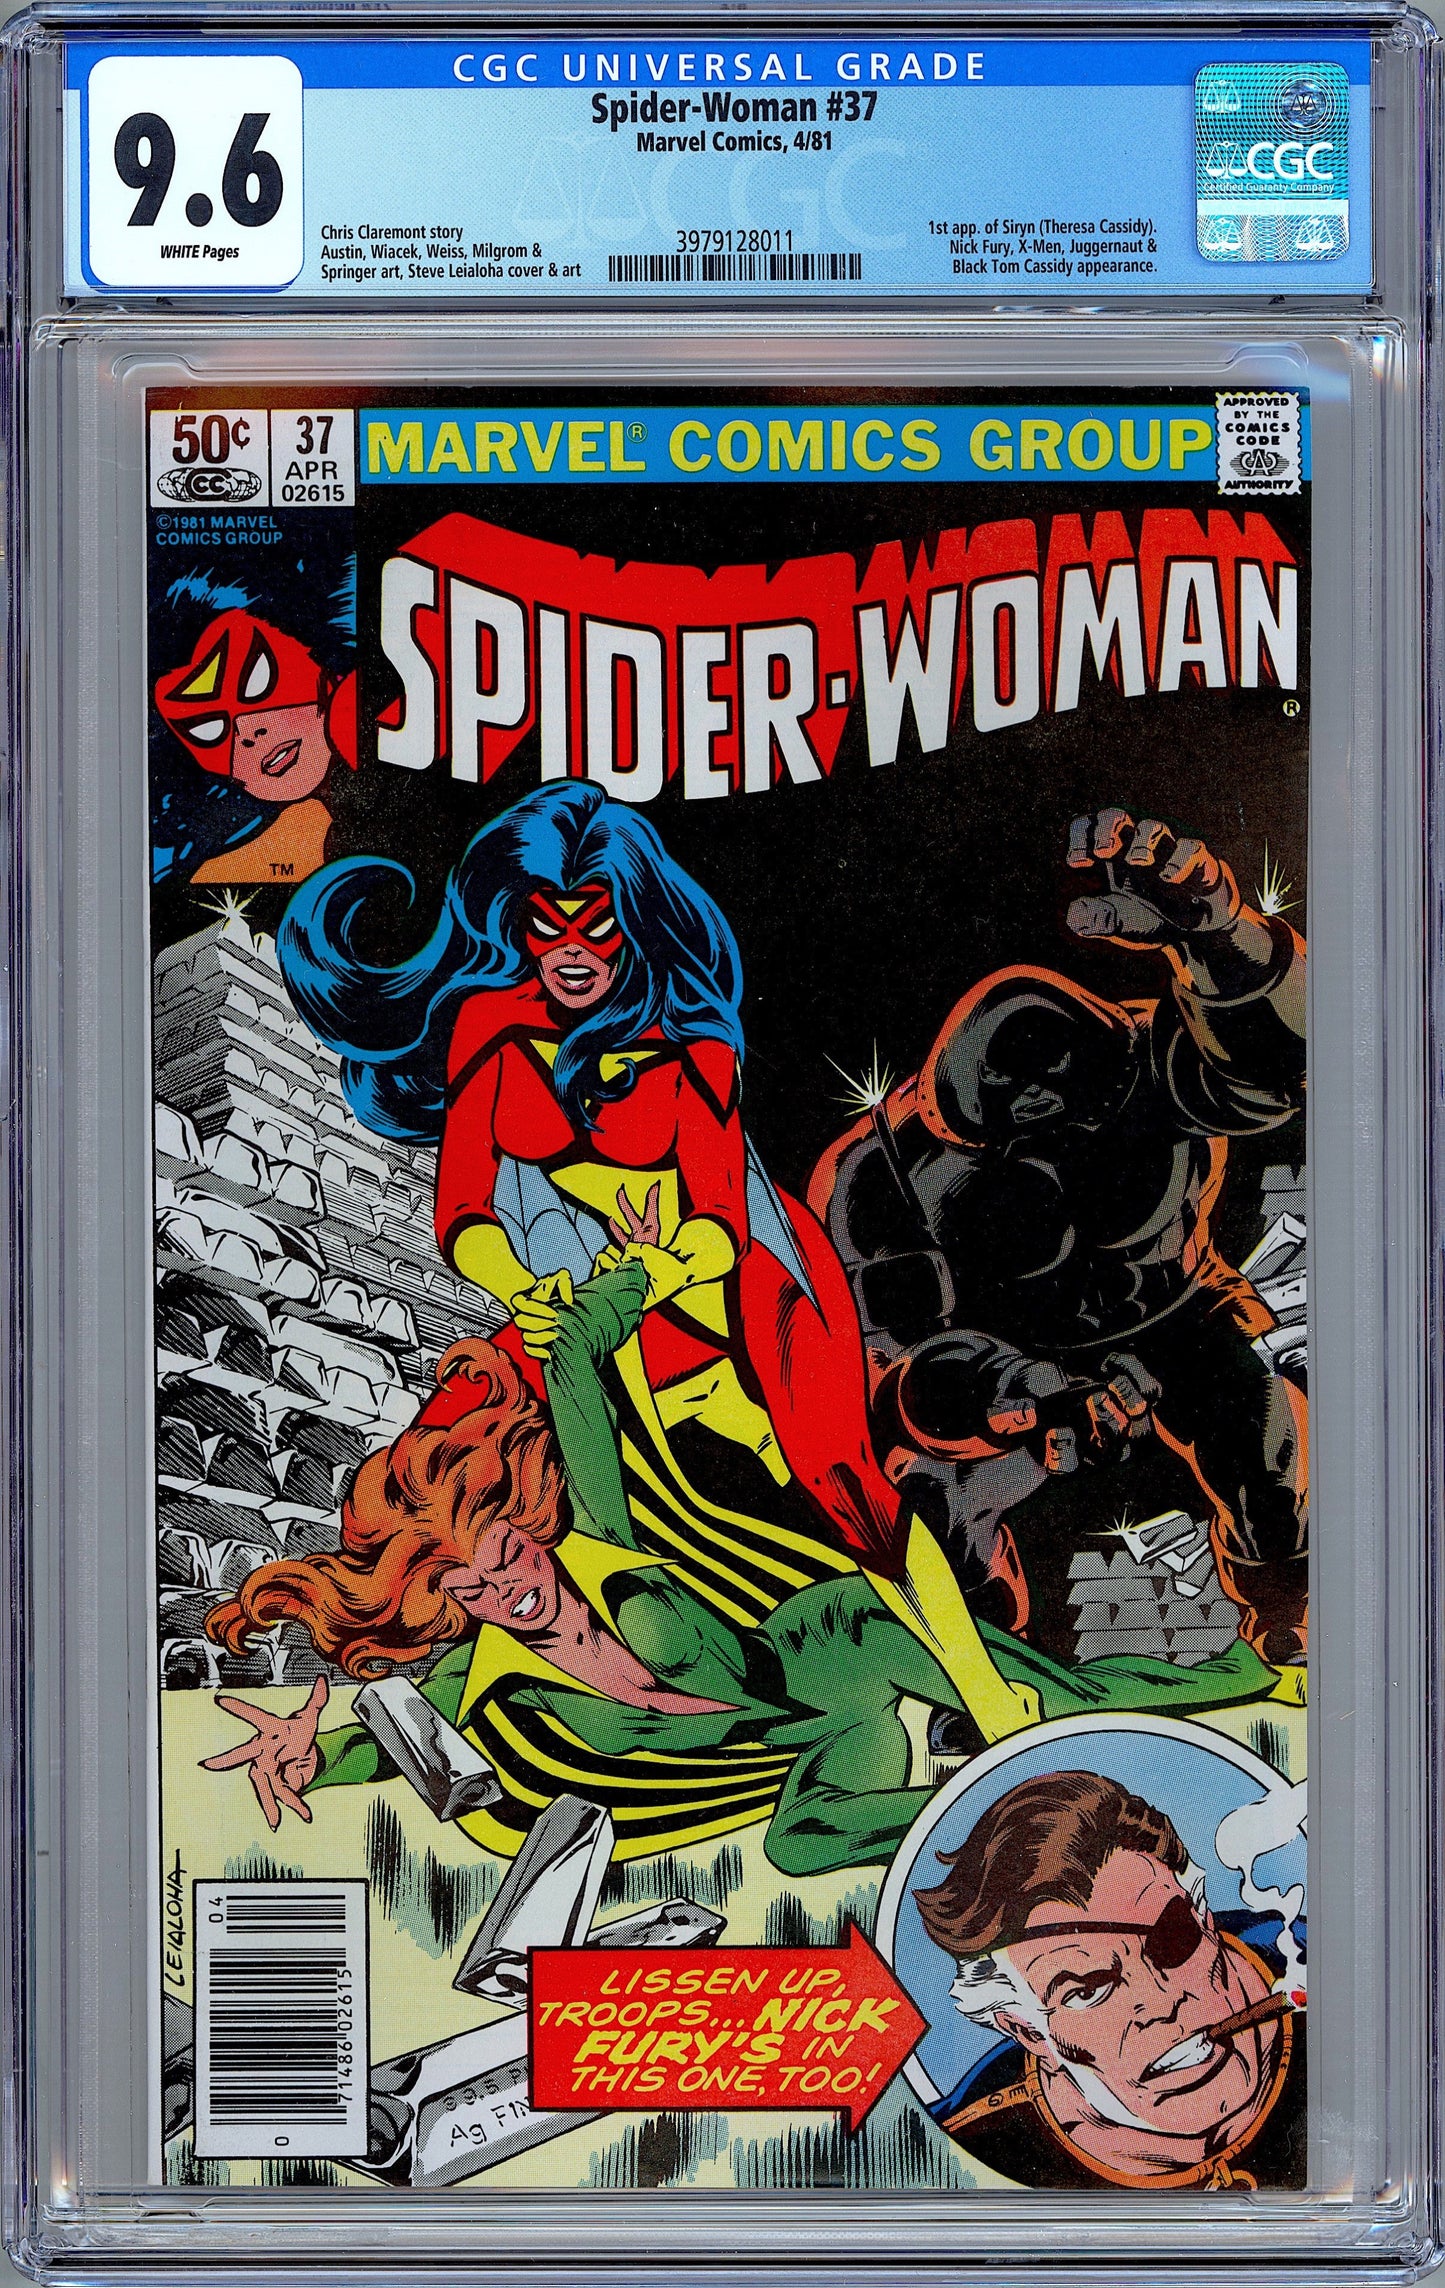 Spider-Woman #37. The 1st Appearance of Siryn. CGC 9.6.